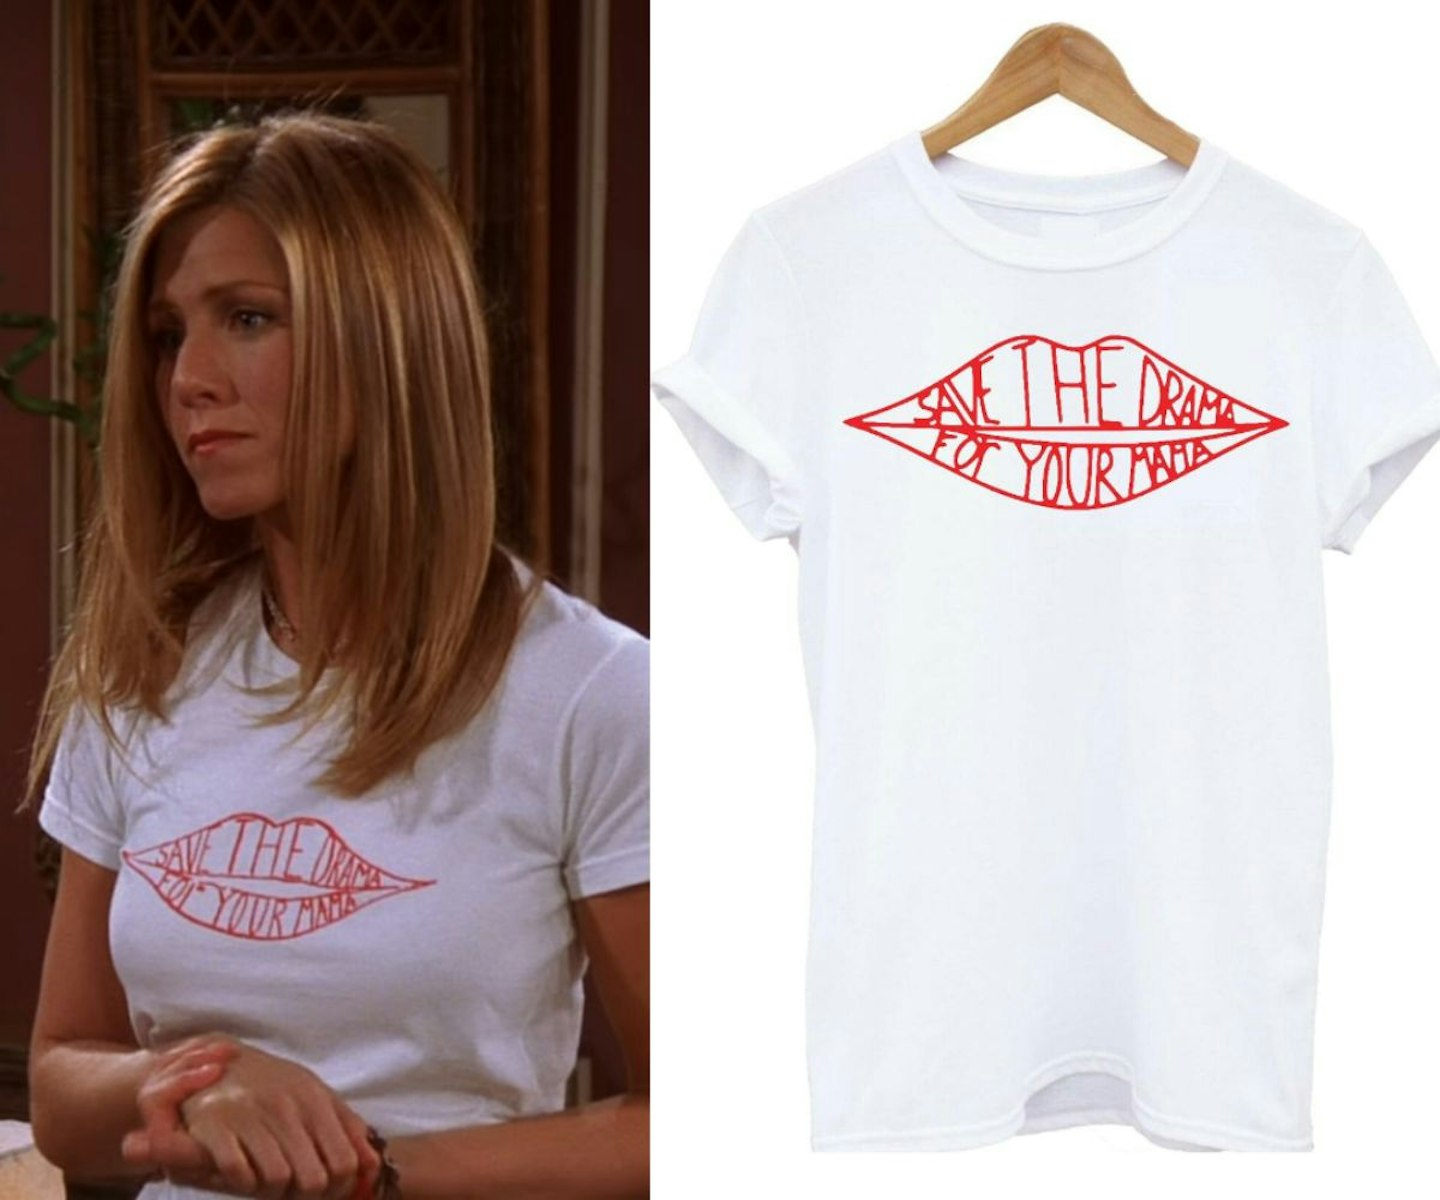 10 Rachel Green Outfits That You Need To Try At Least Once